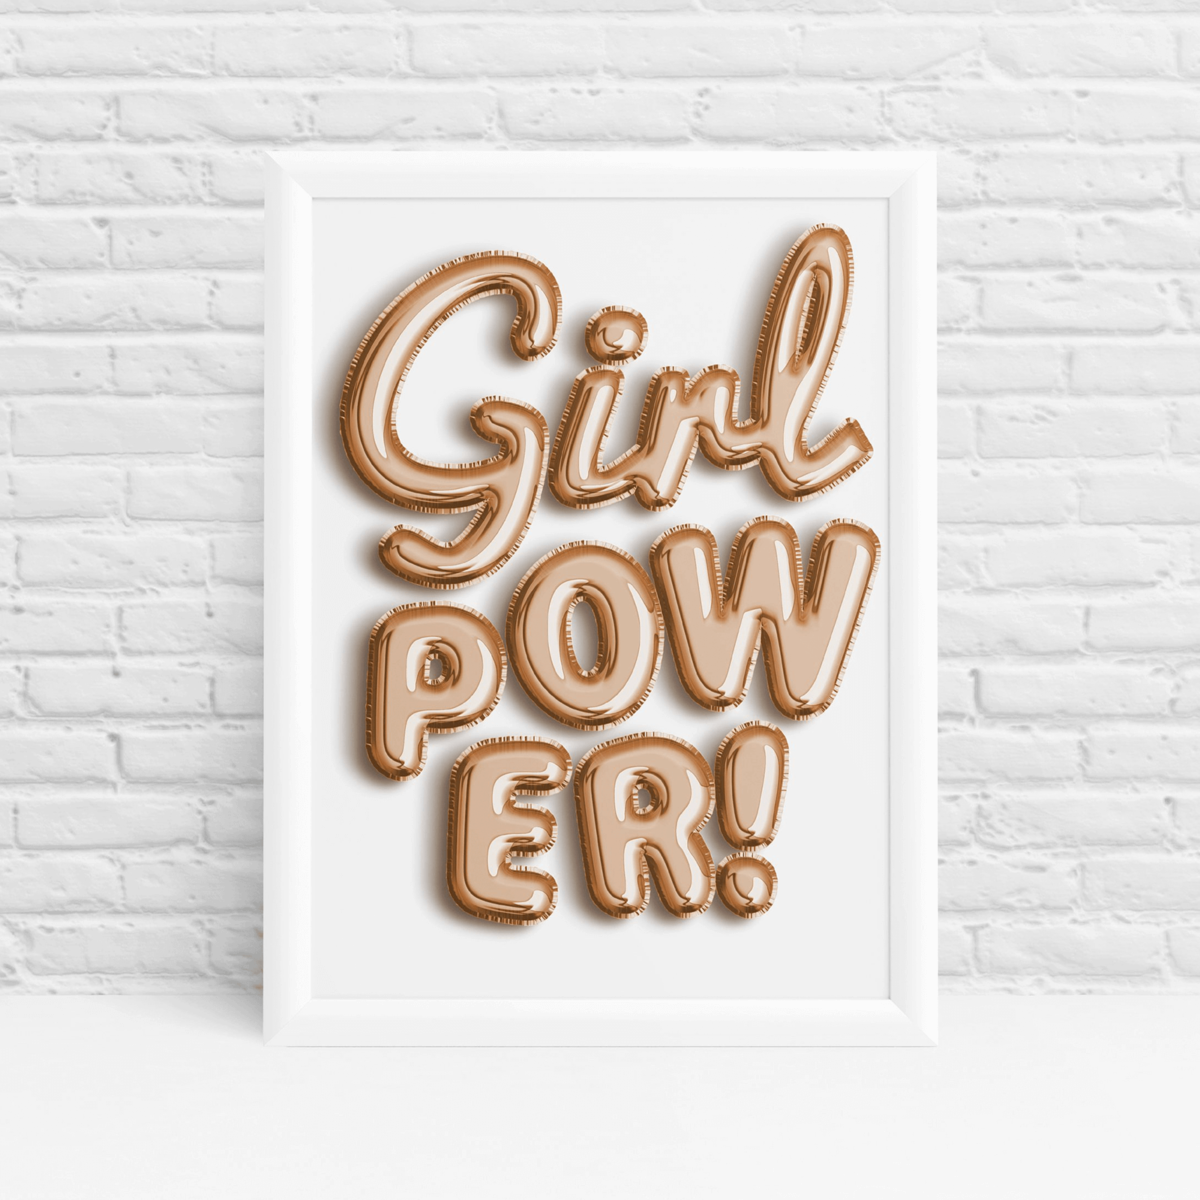 Cute Girl Power helium balloons positive quotes print by Ibbleobble®